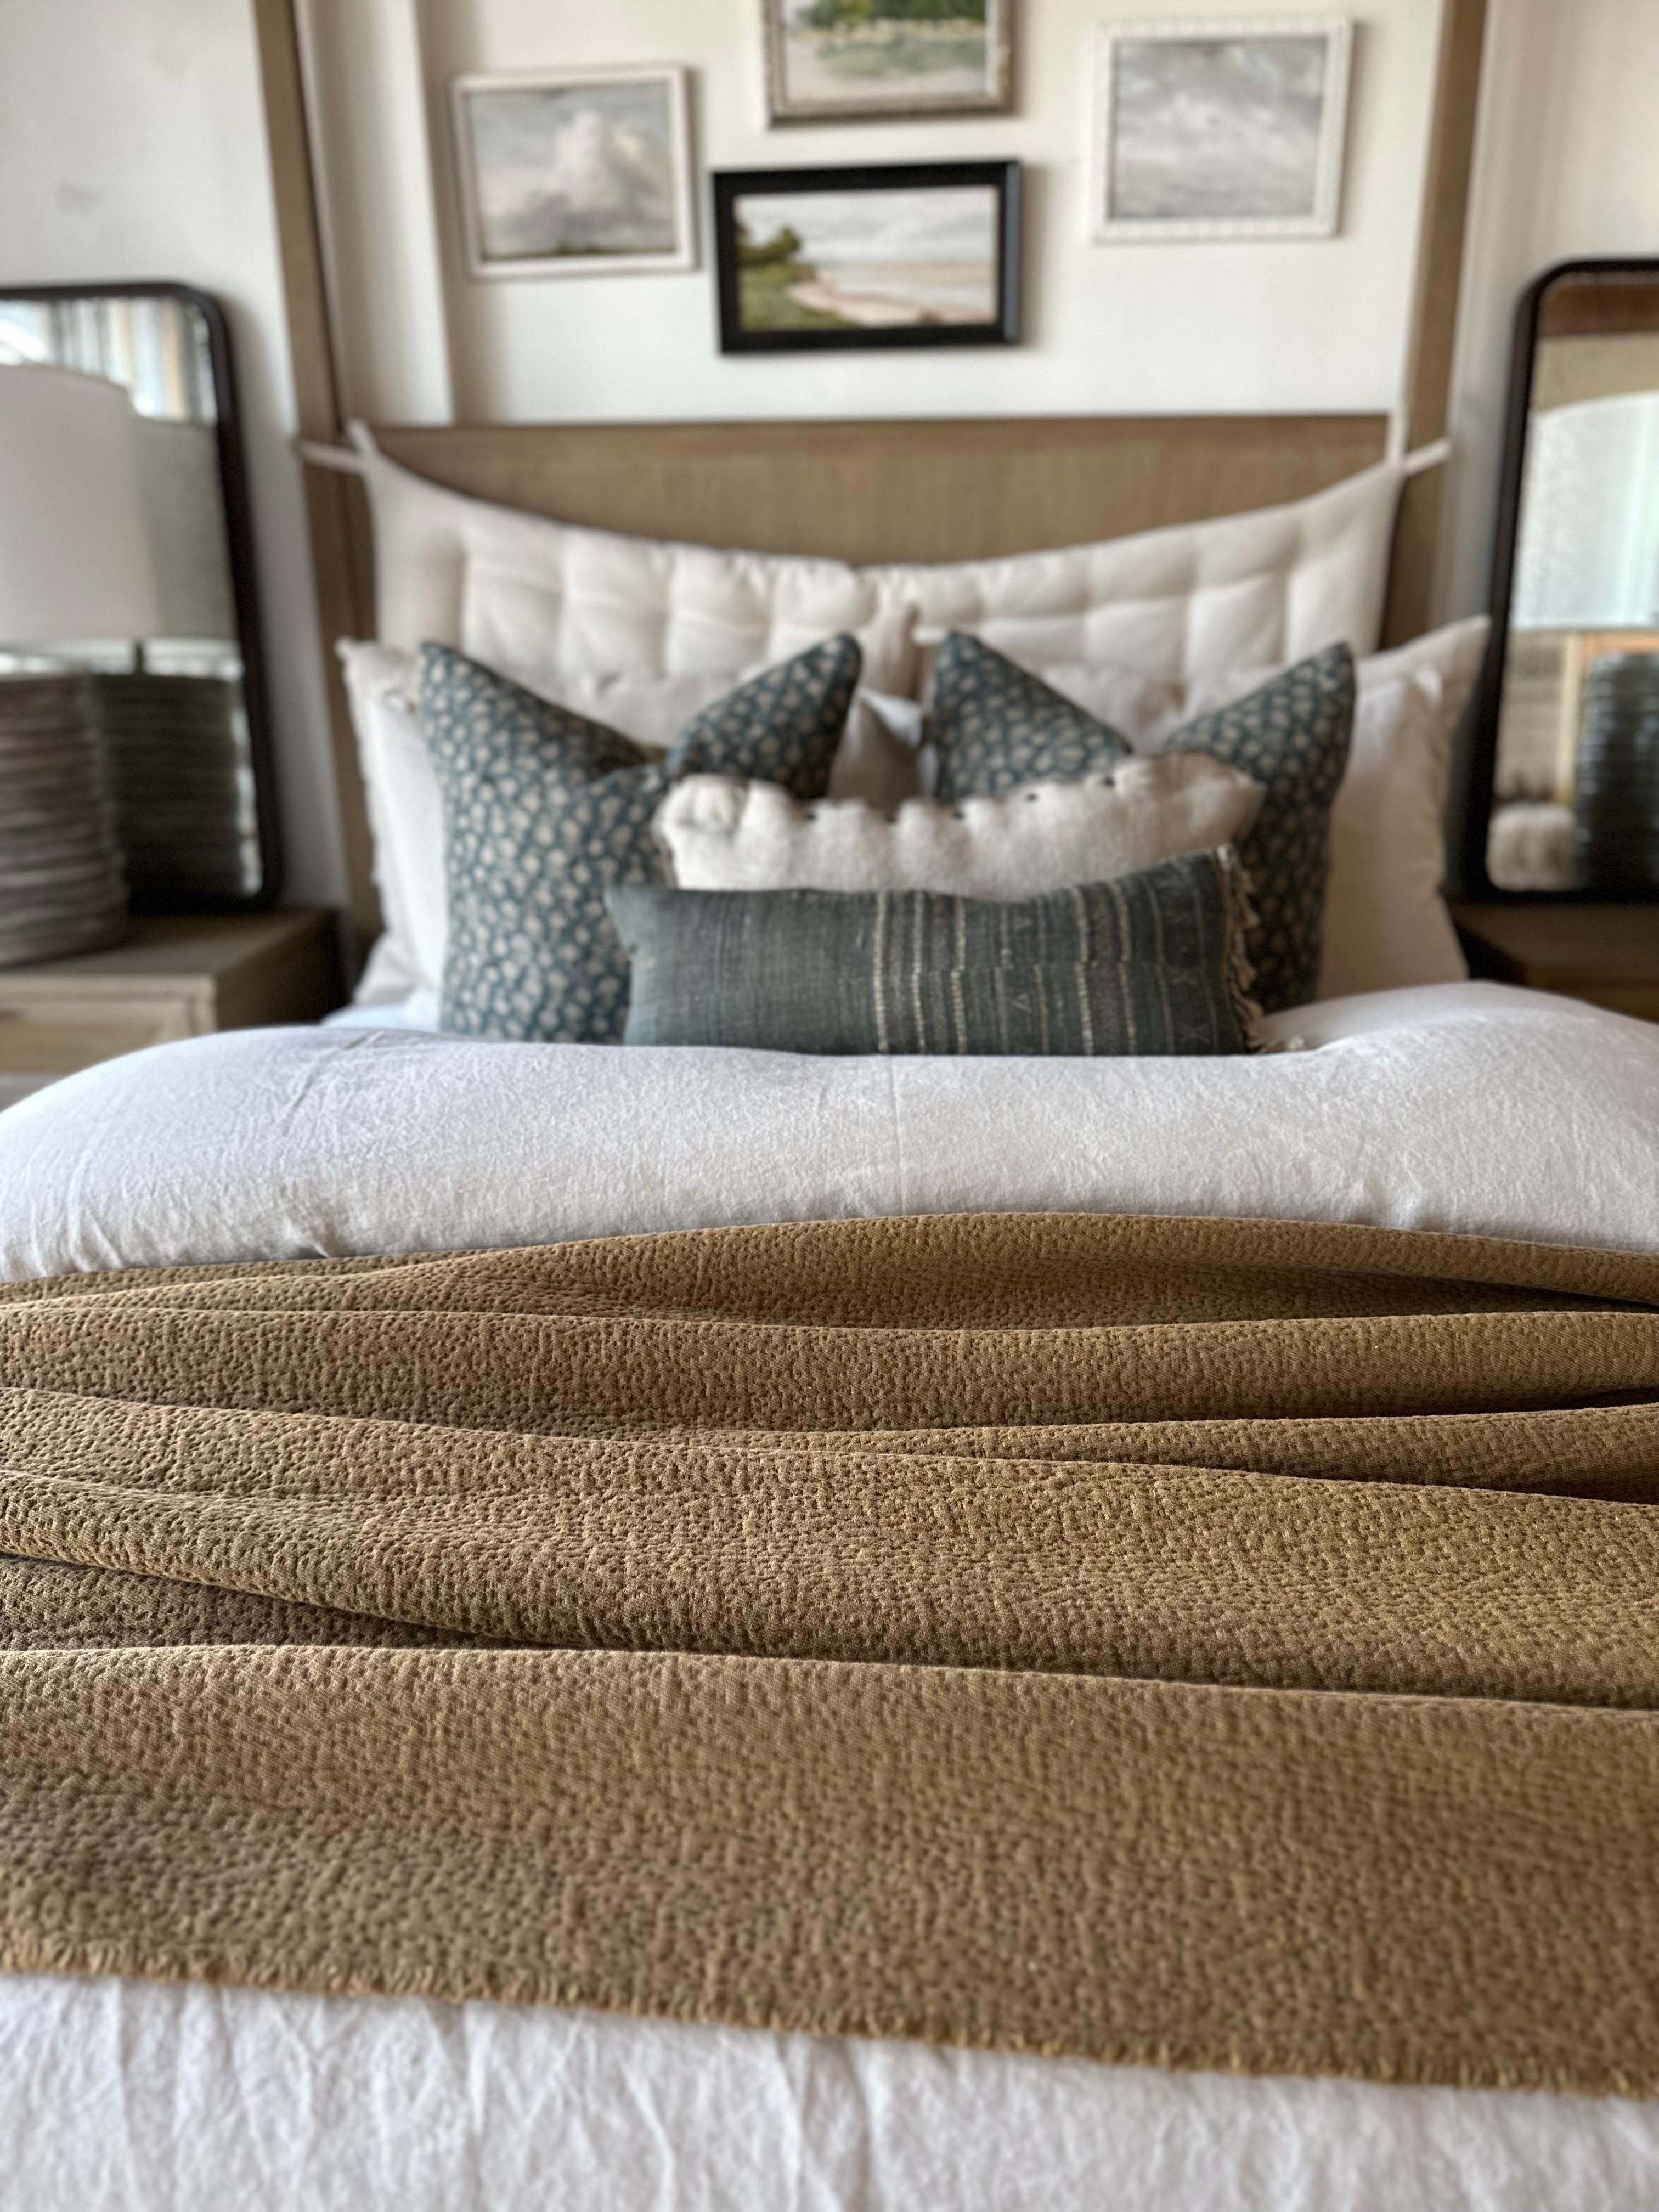 A soft plush cotton baffle waffle cotton coverlet. Great to use as an accent at the end of the bed, or use as a coverlet.
Color: Caramel 
Size : 94x102
Large size can accomodate a queen size or king size bed.
Machine wash cold, tumble low.
Made